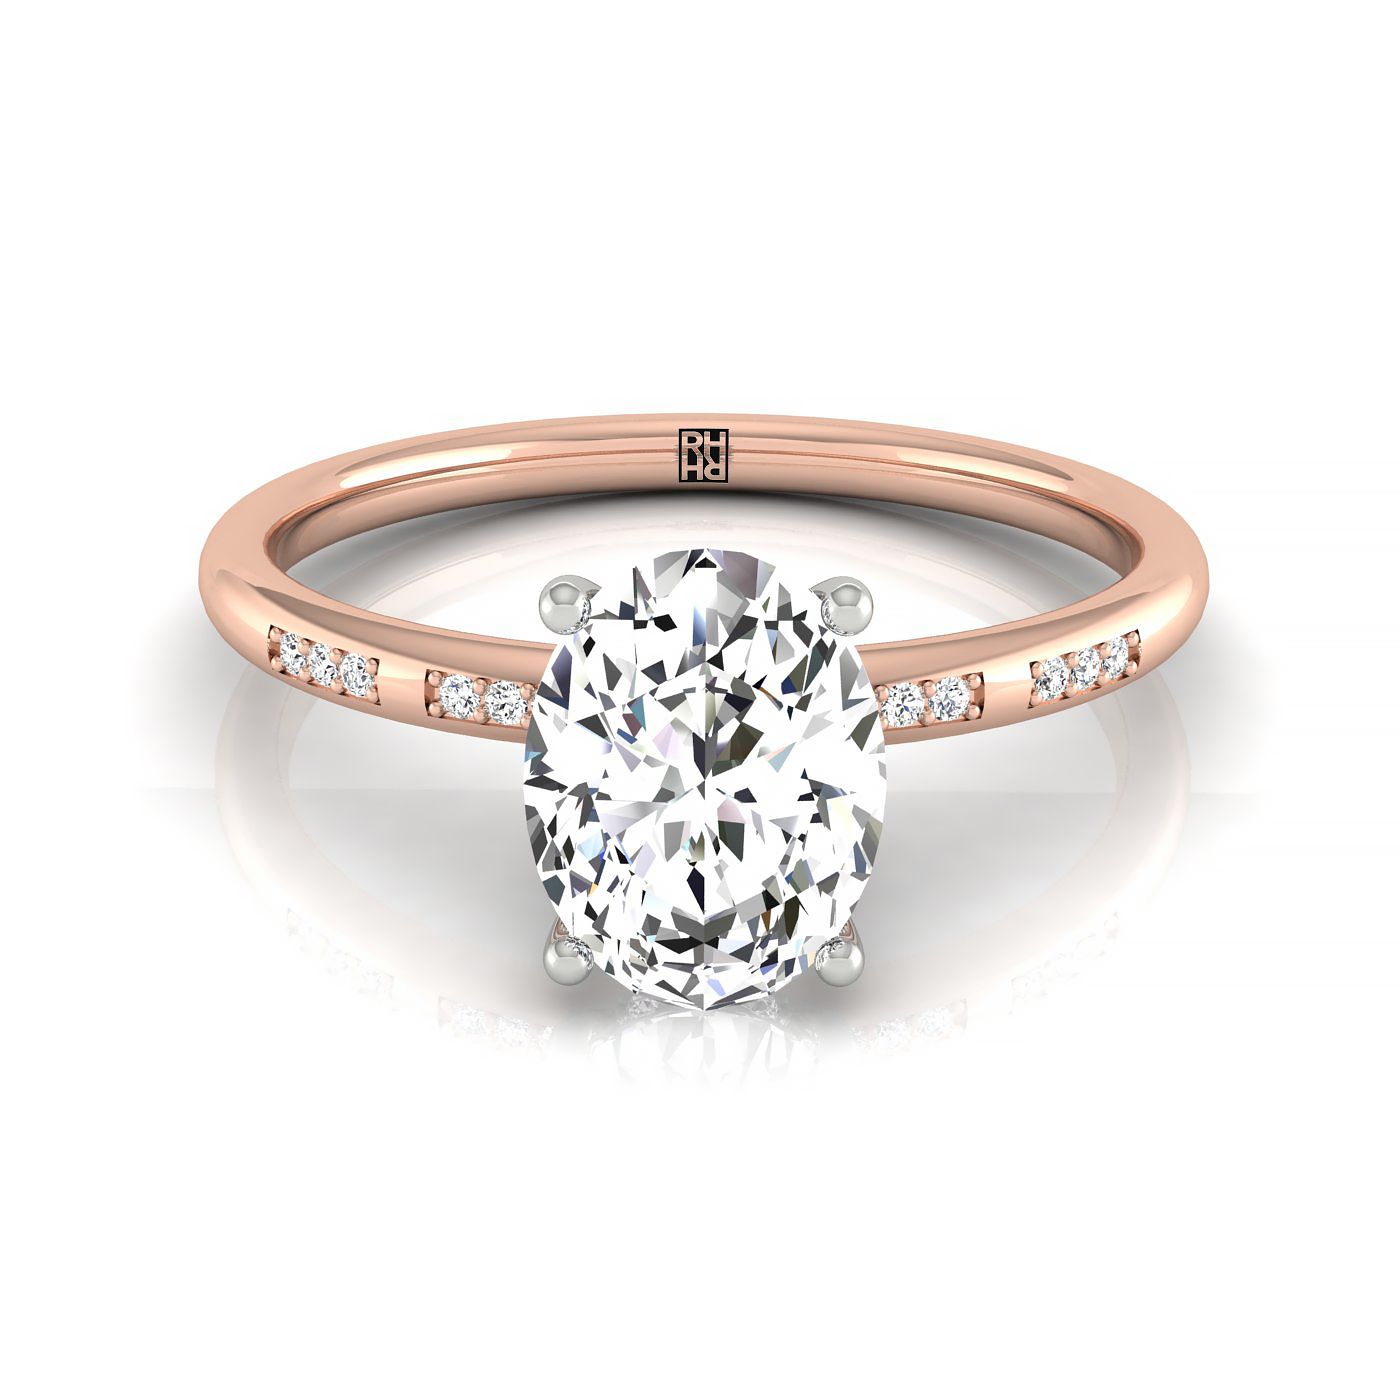 14kr Oval Engagement Ring With High Hidden Halo With 26 Prong Set Round Diamonds